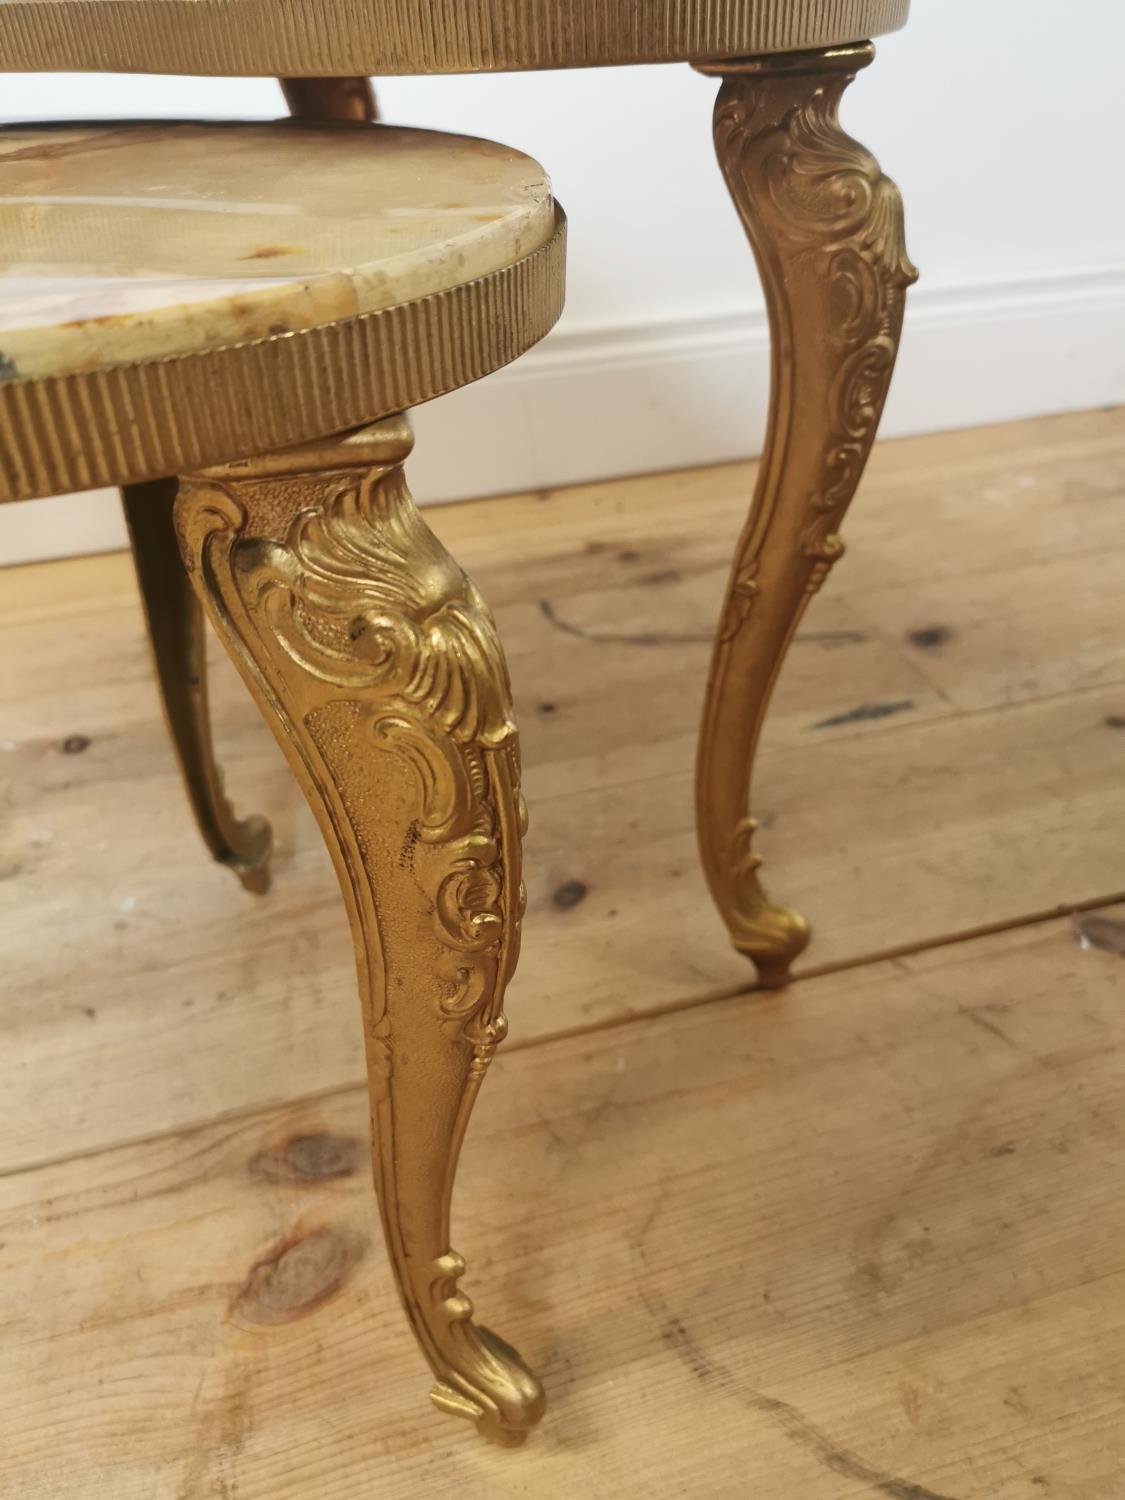 Nest of two gilded metal lamp tables - Image 2 of 5